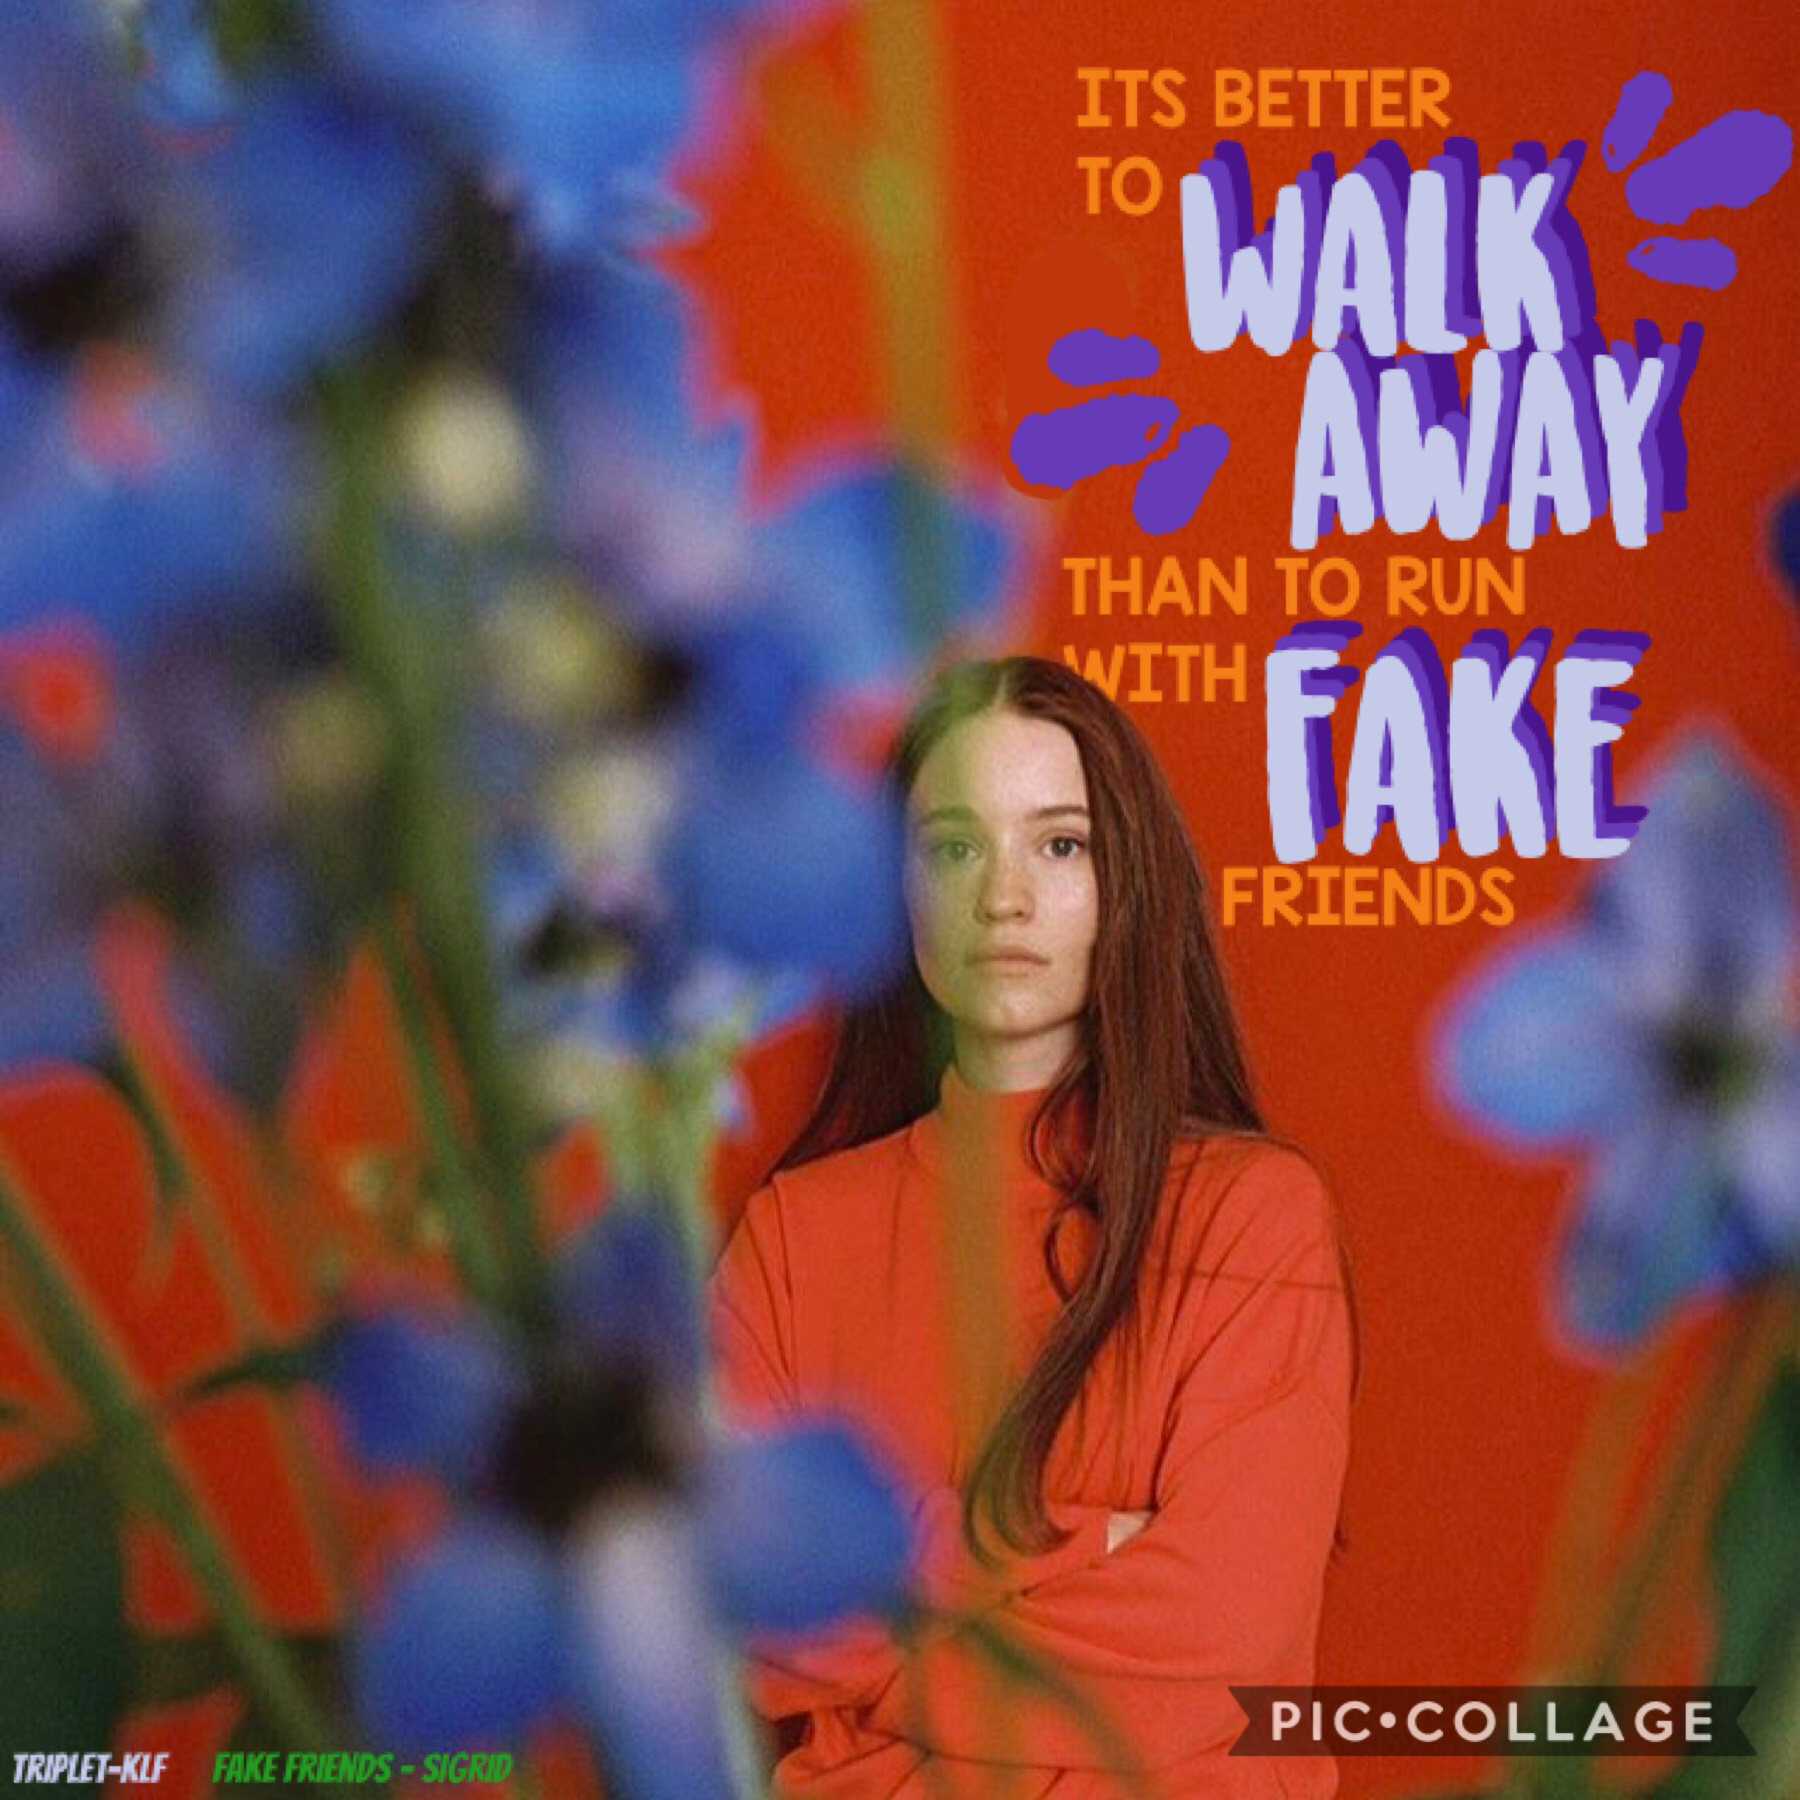 lyrics from fake friends by Sigrid. and picture from Sigrids Instagram ♥️ go listen to her music if you haven’t before! ✨

Also, so happy about the feature that I got yesterday! Thank you! 🌿